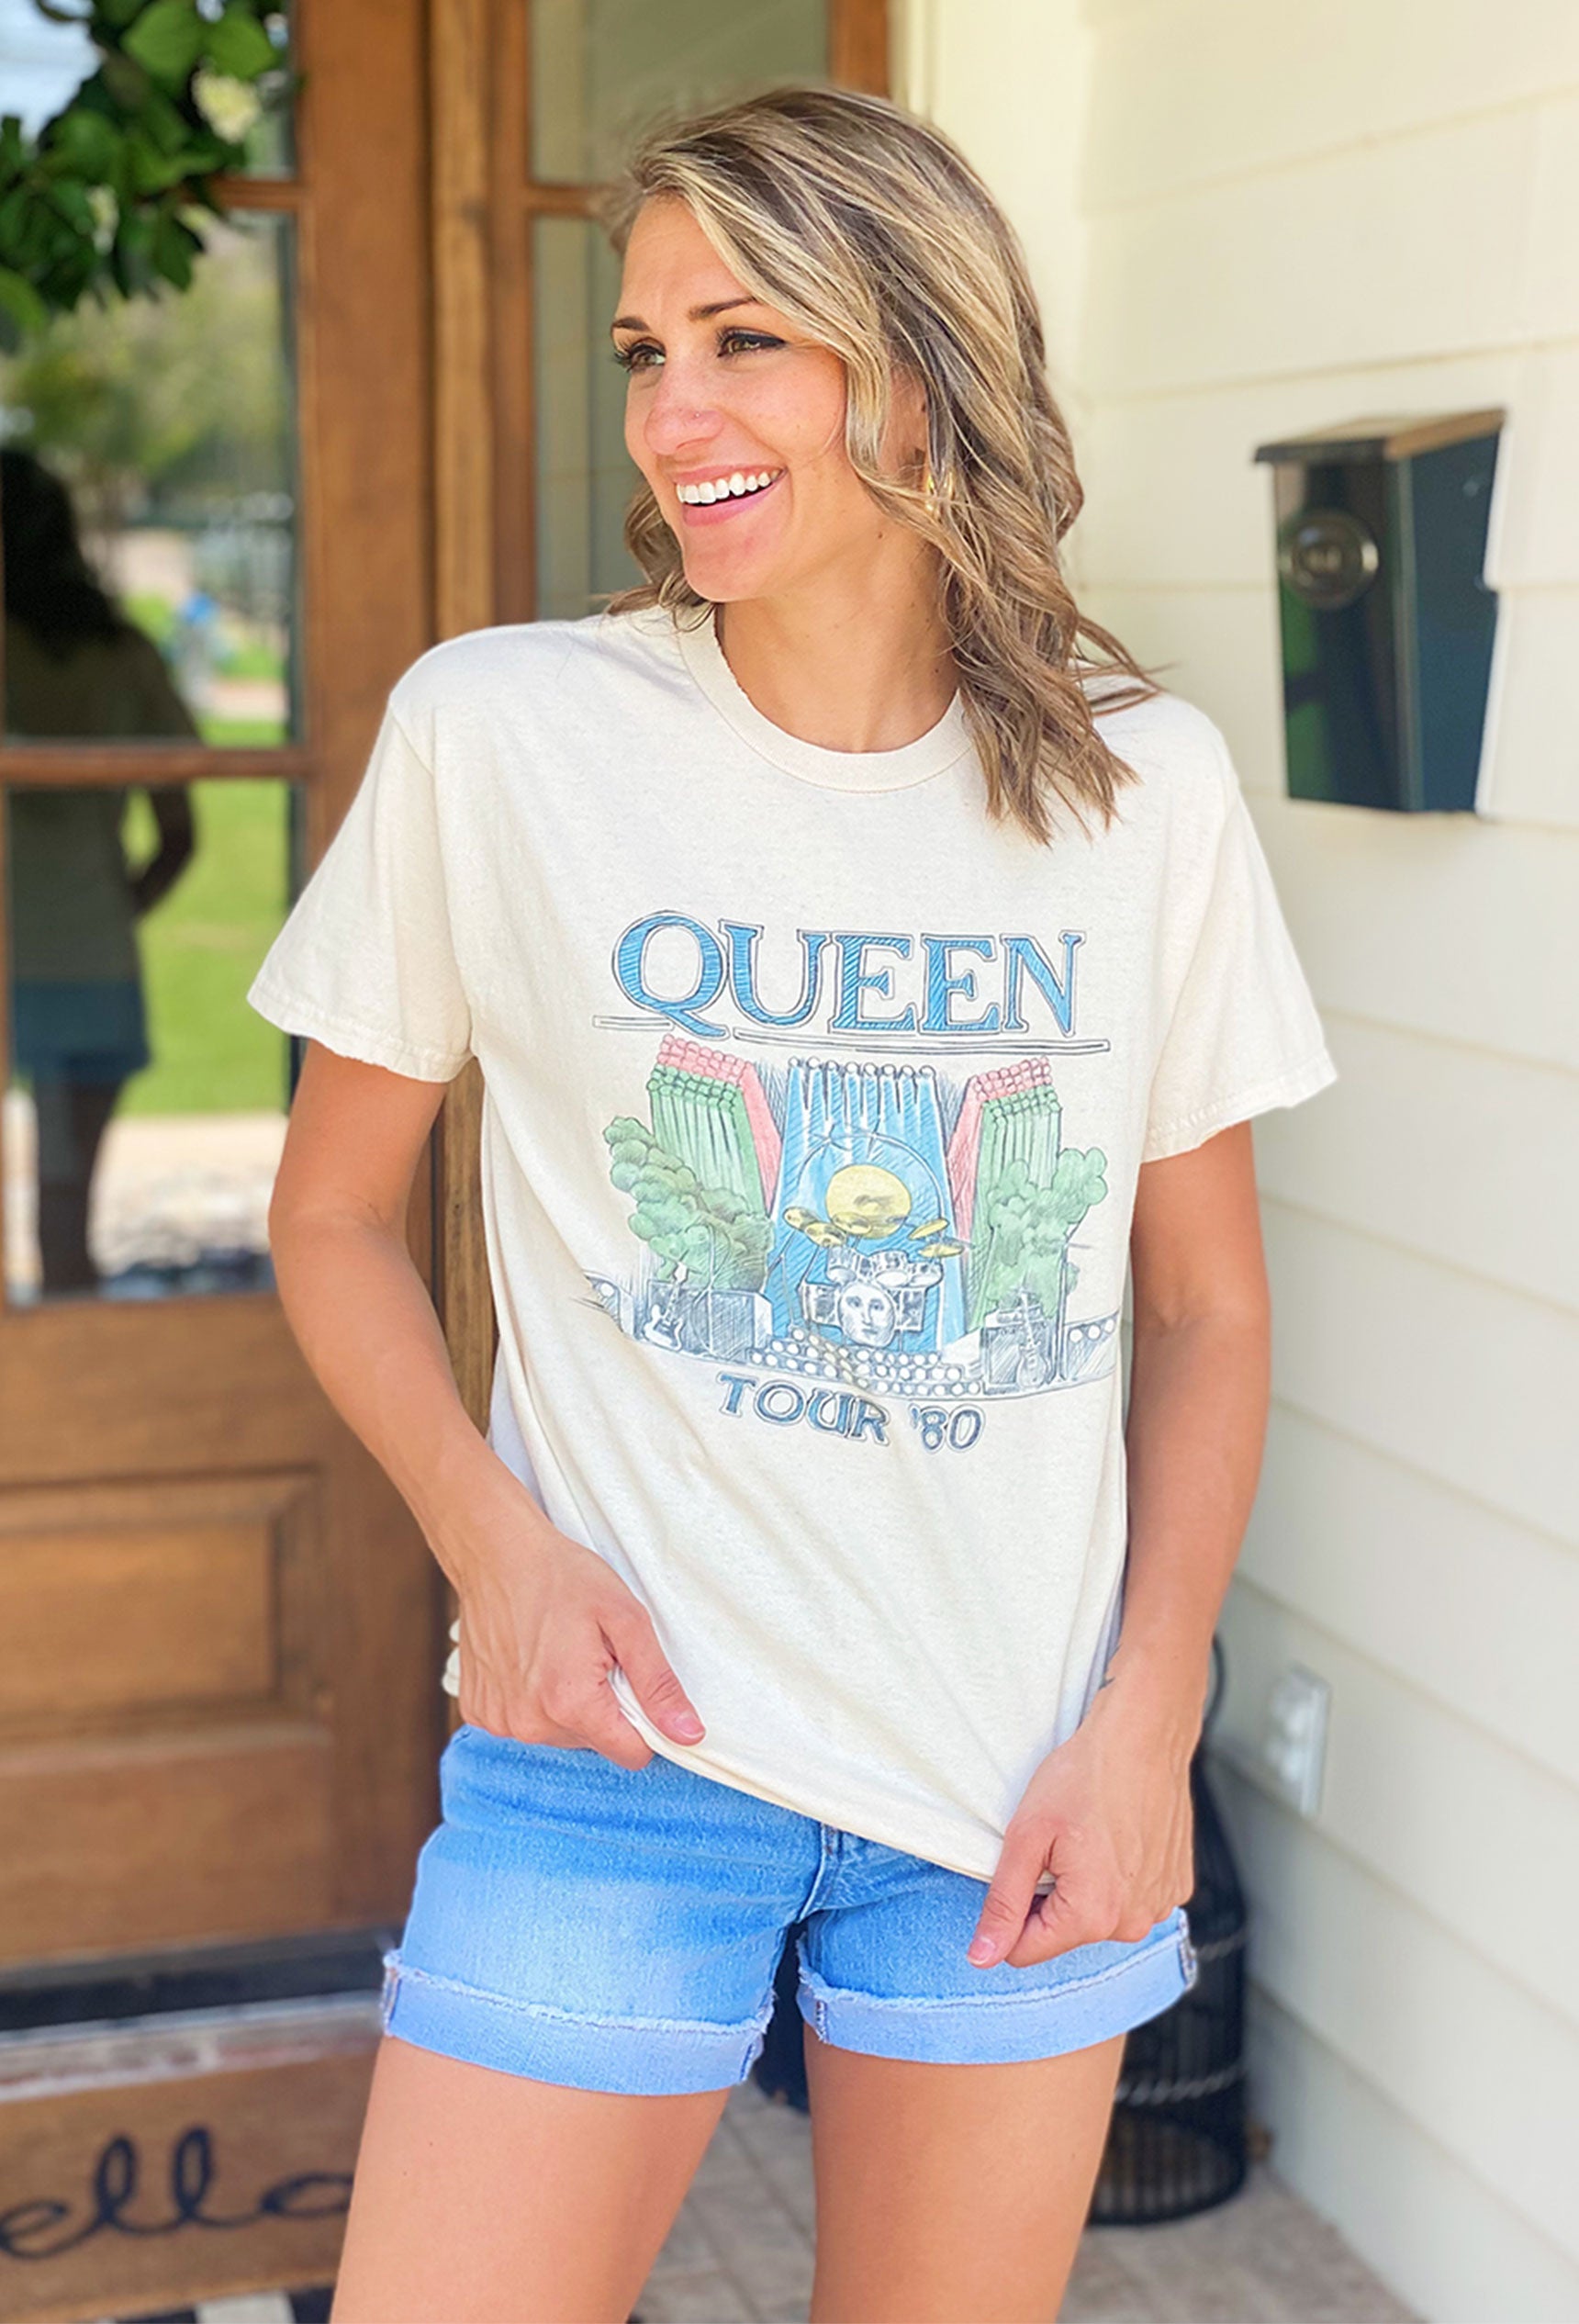 Queen Graphic Tee, neutral tee features the iconic "Queen Tour '80" logo and an on stage graphic